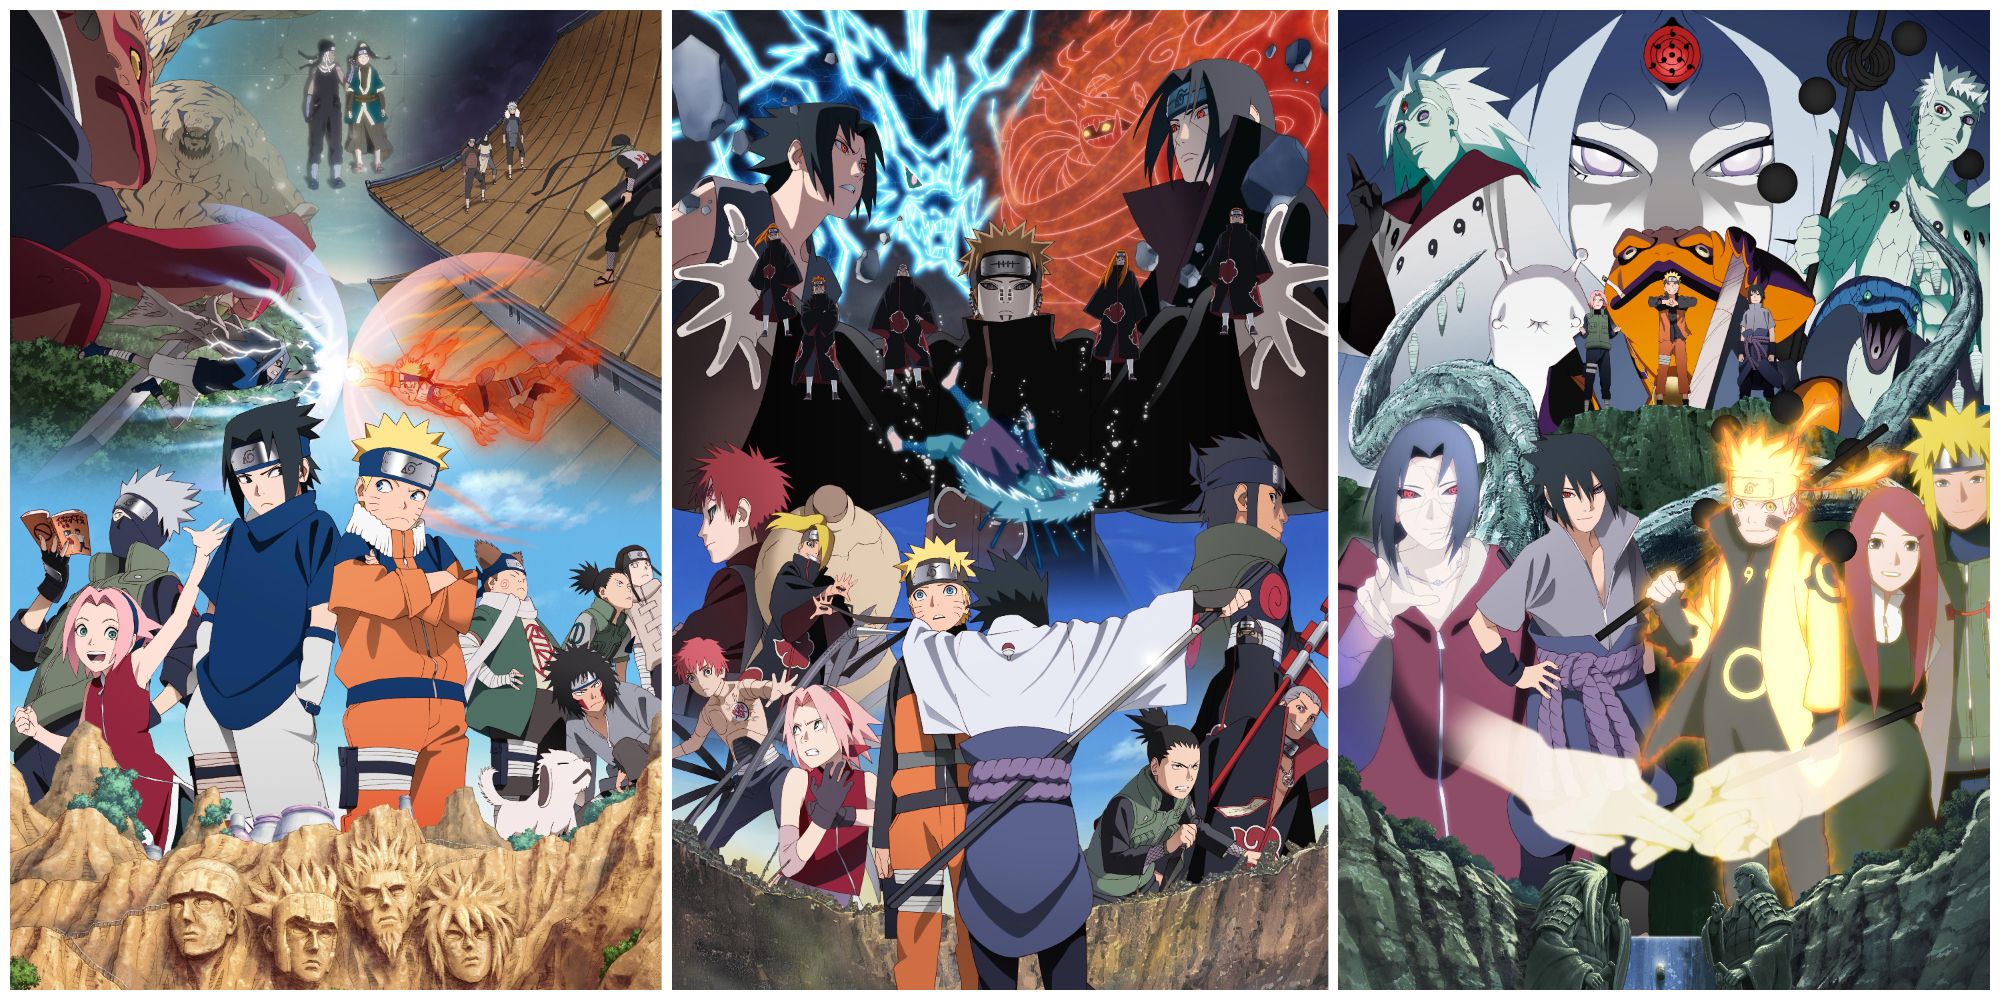 Naruto Anime to Celebrate 20th Anniversary With 4 New Episodes